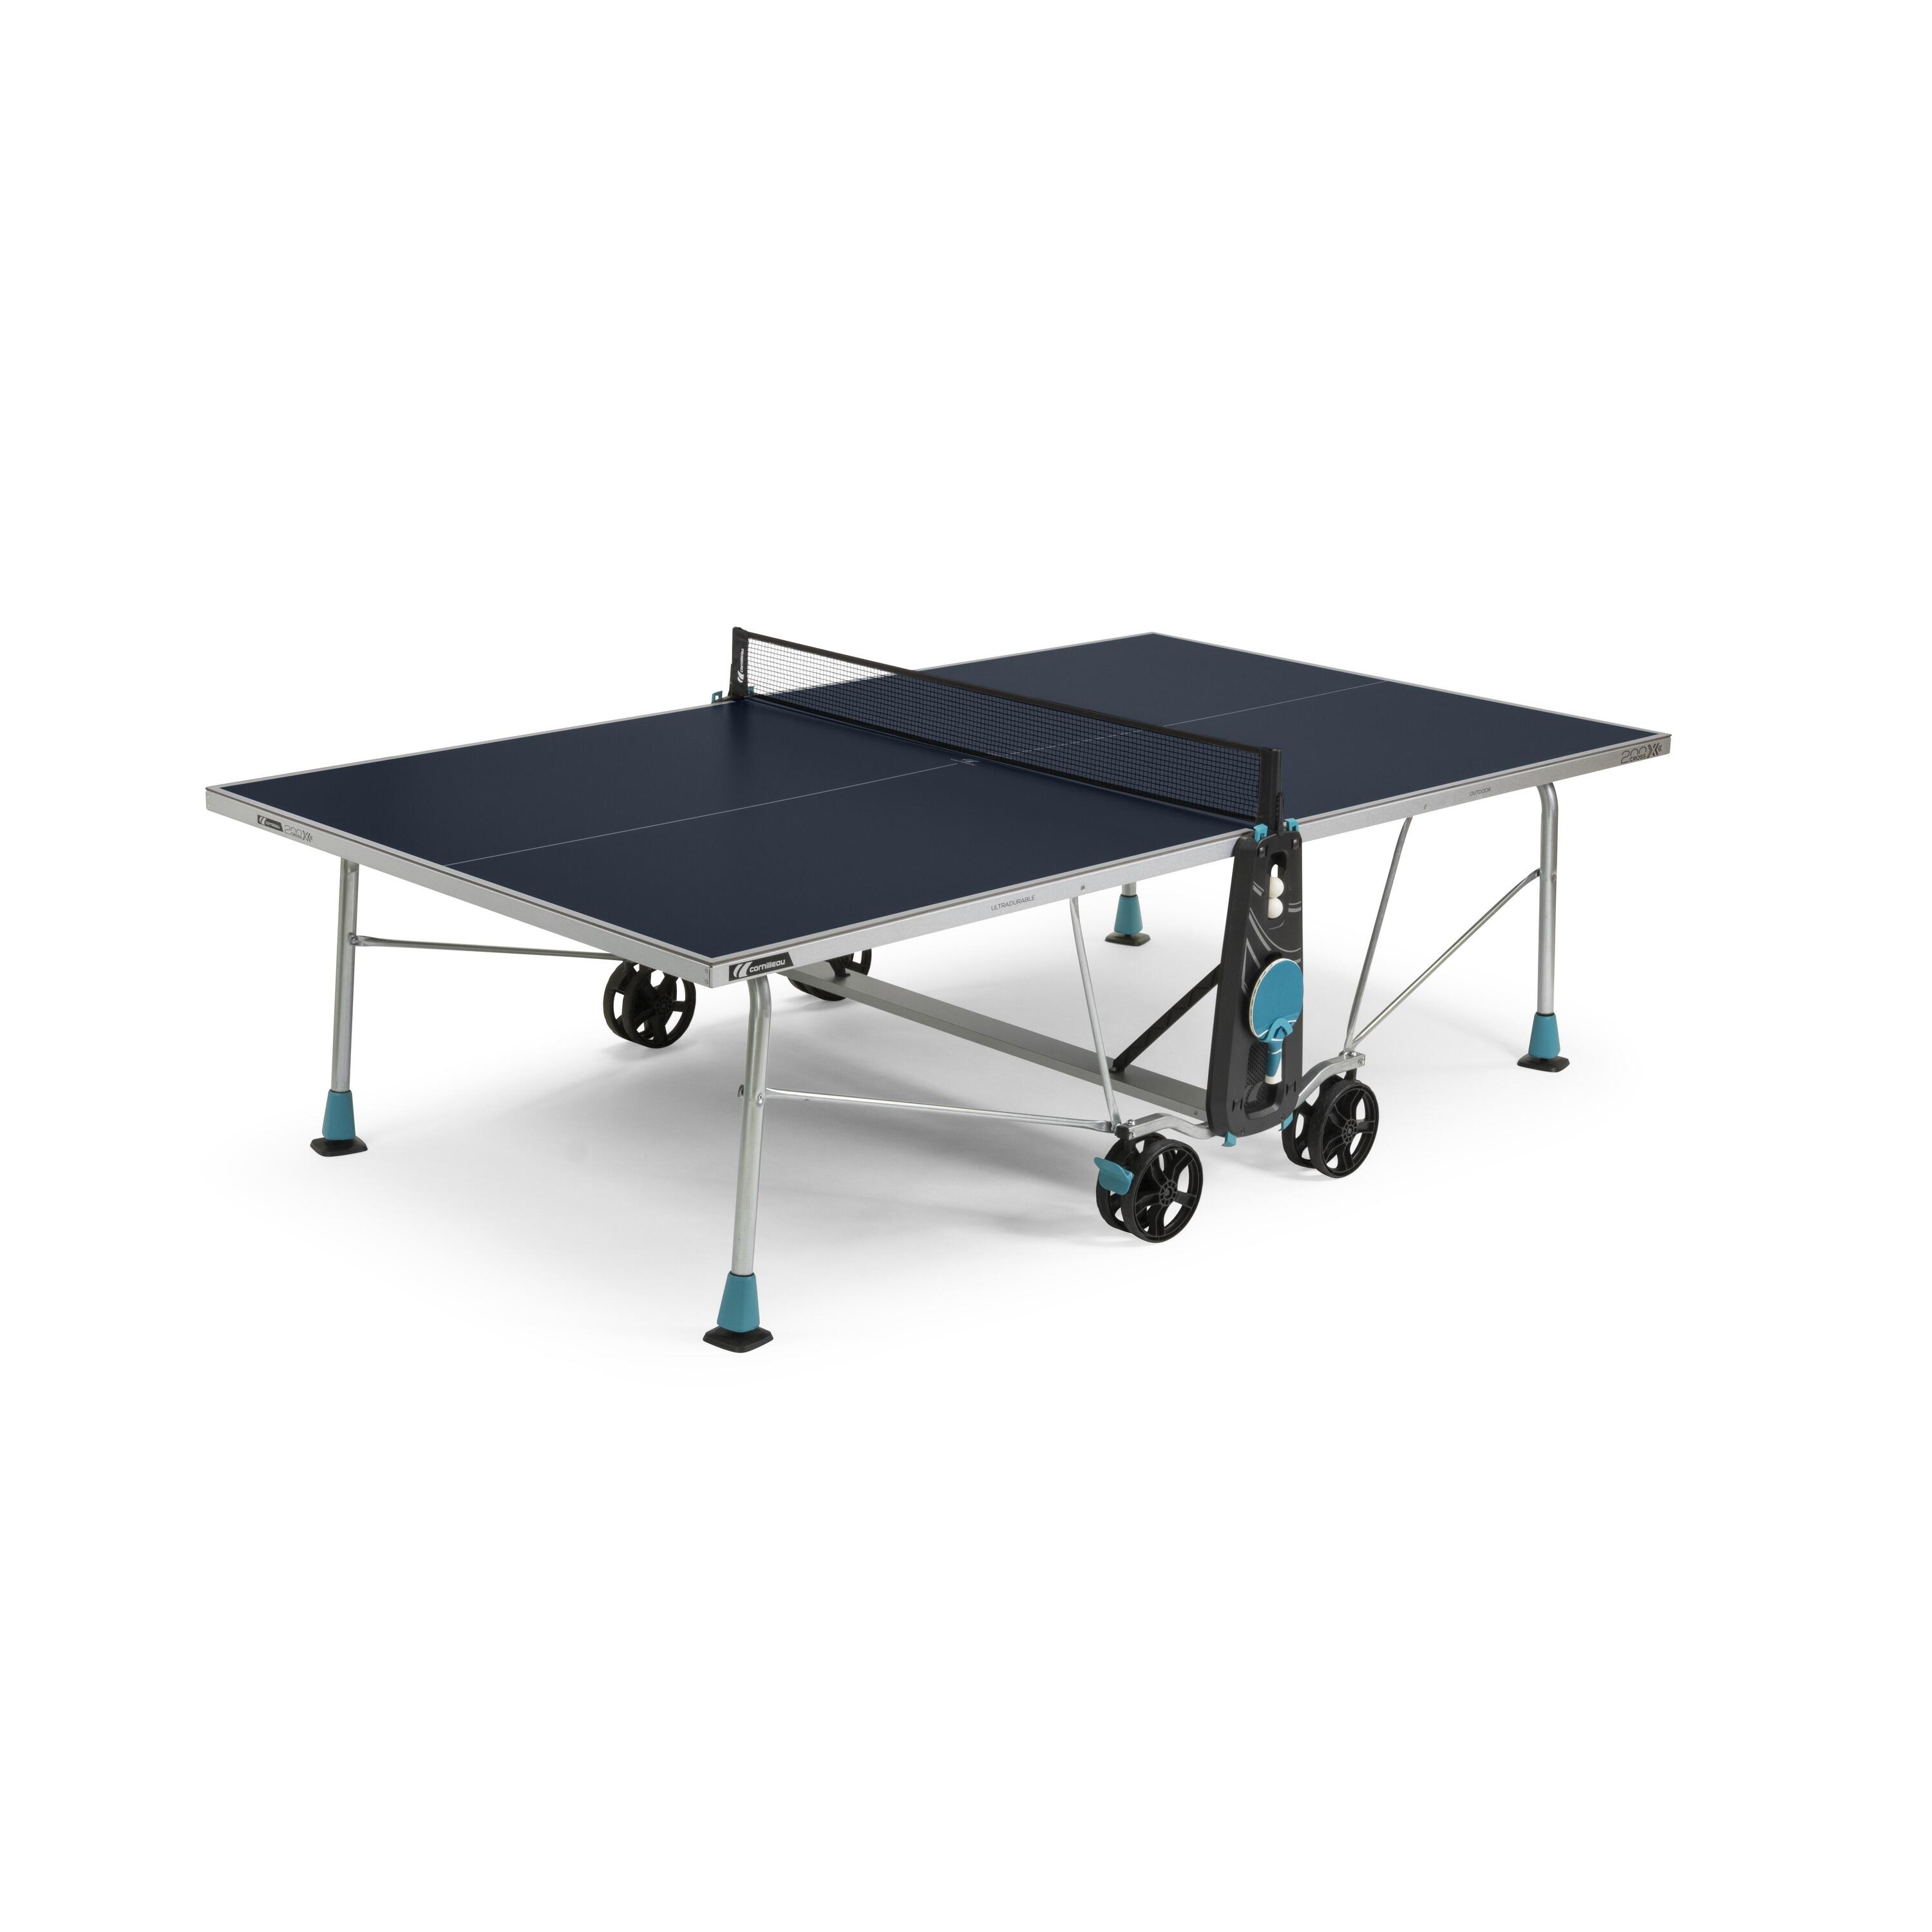 200X Sport Outdoor Table Tennis Table - Blue 1/11